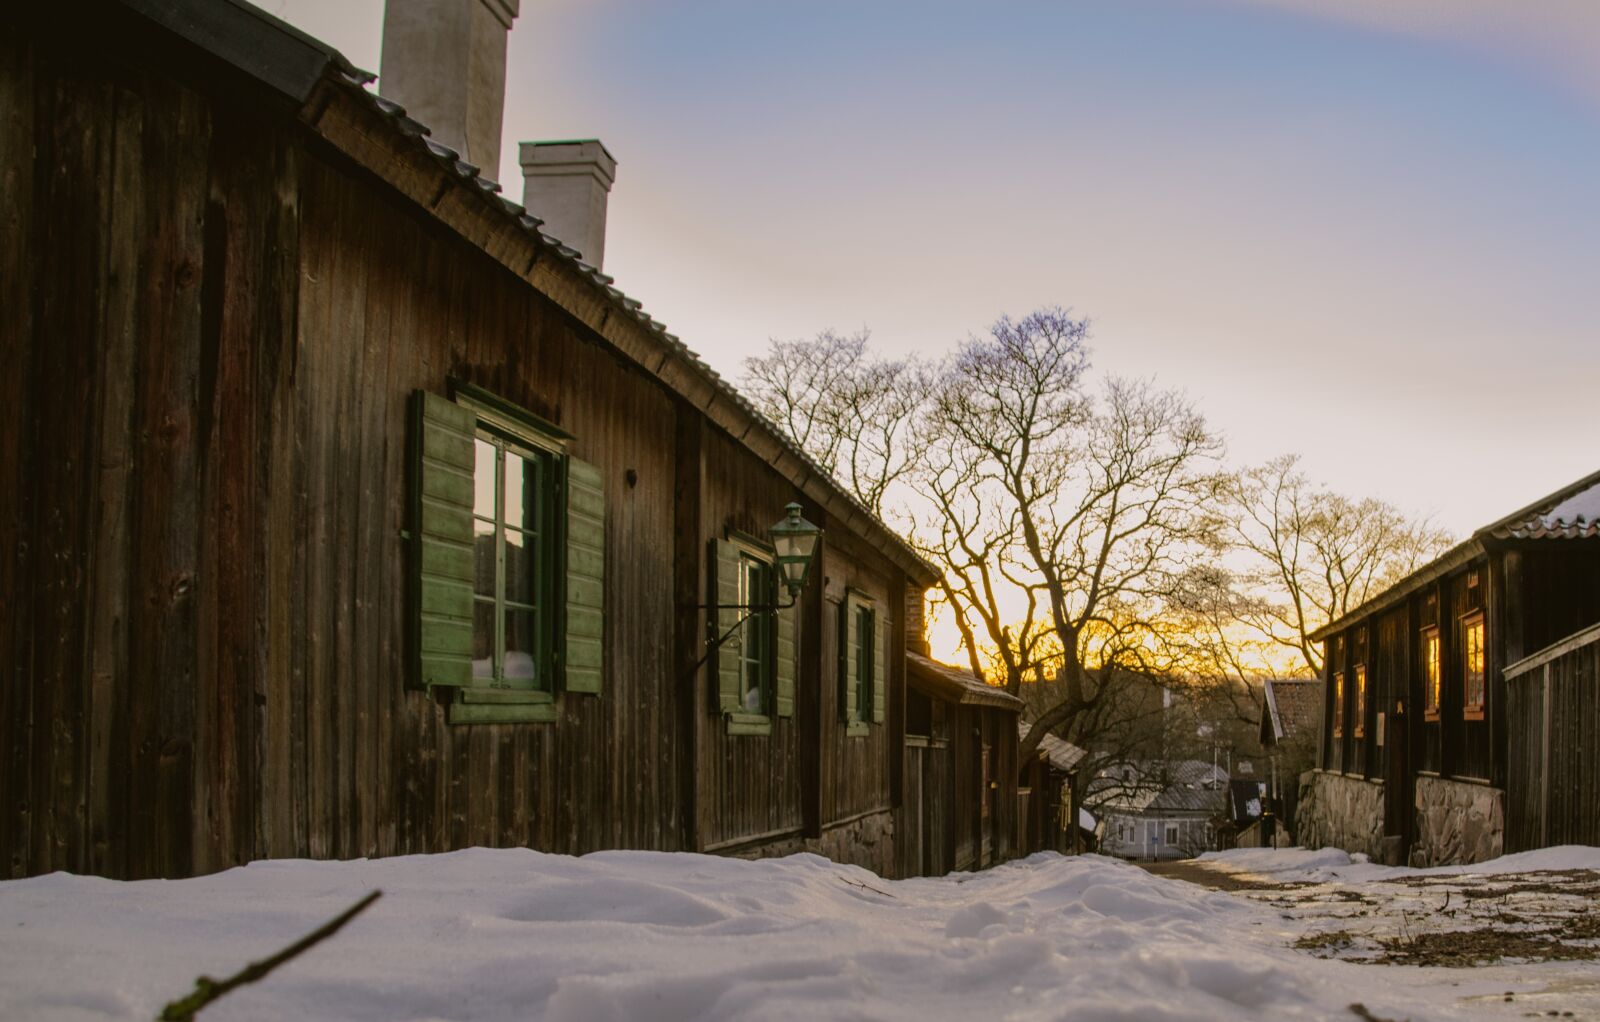 Nikon D5300 + Tamron 18-270mm F3.5-6.3 Di II VC PZD sample photo. Old town, winter, sunset photography